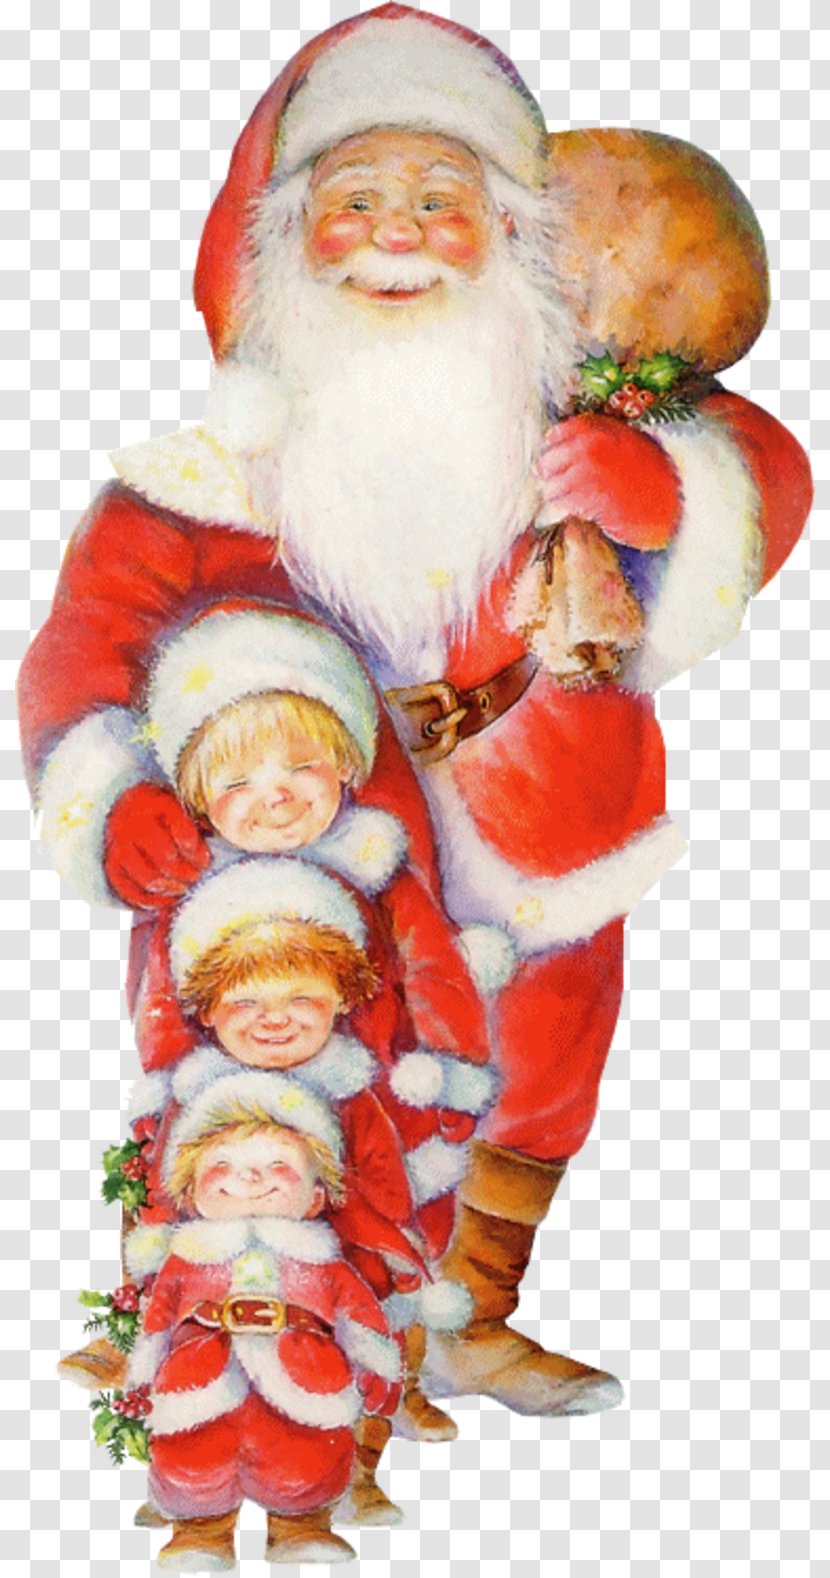 Santa Claus Animation Christmas - Giphy Transparent PNG